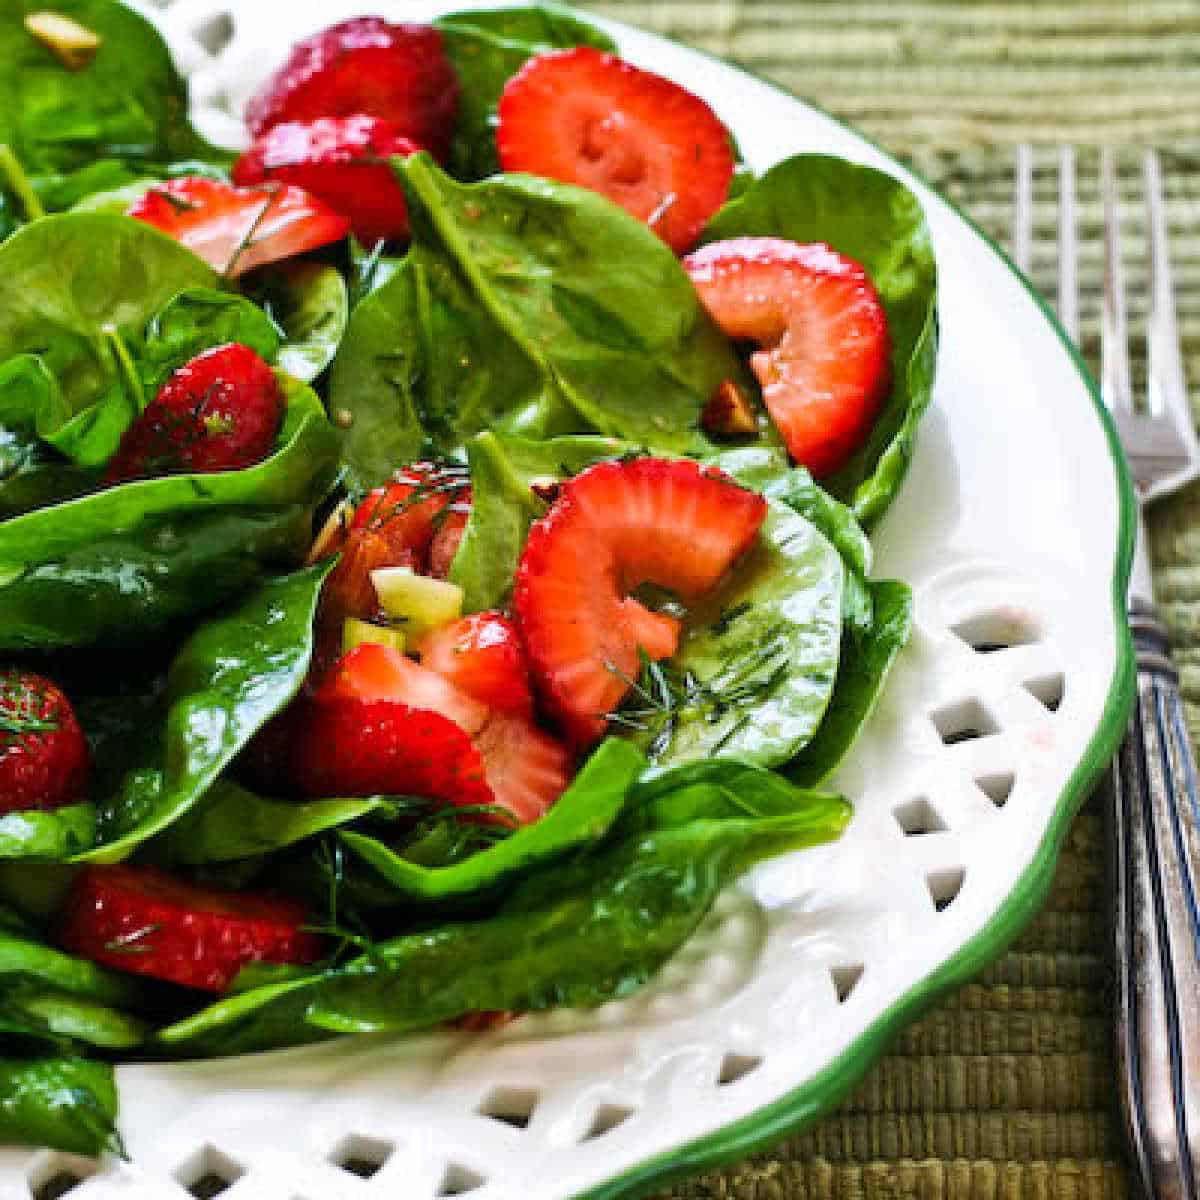 Strawberry and spinach salad displayed on a serving plate